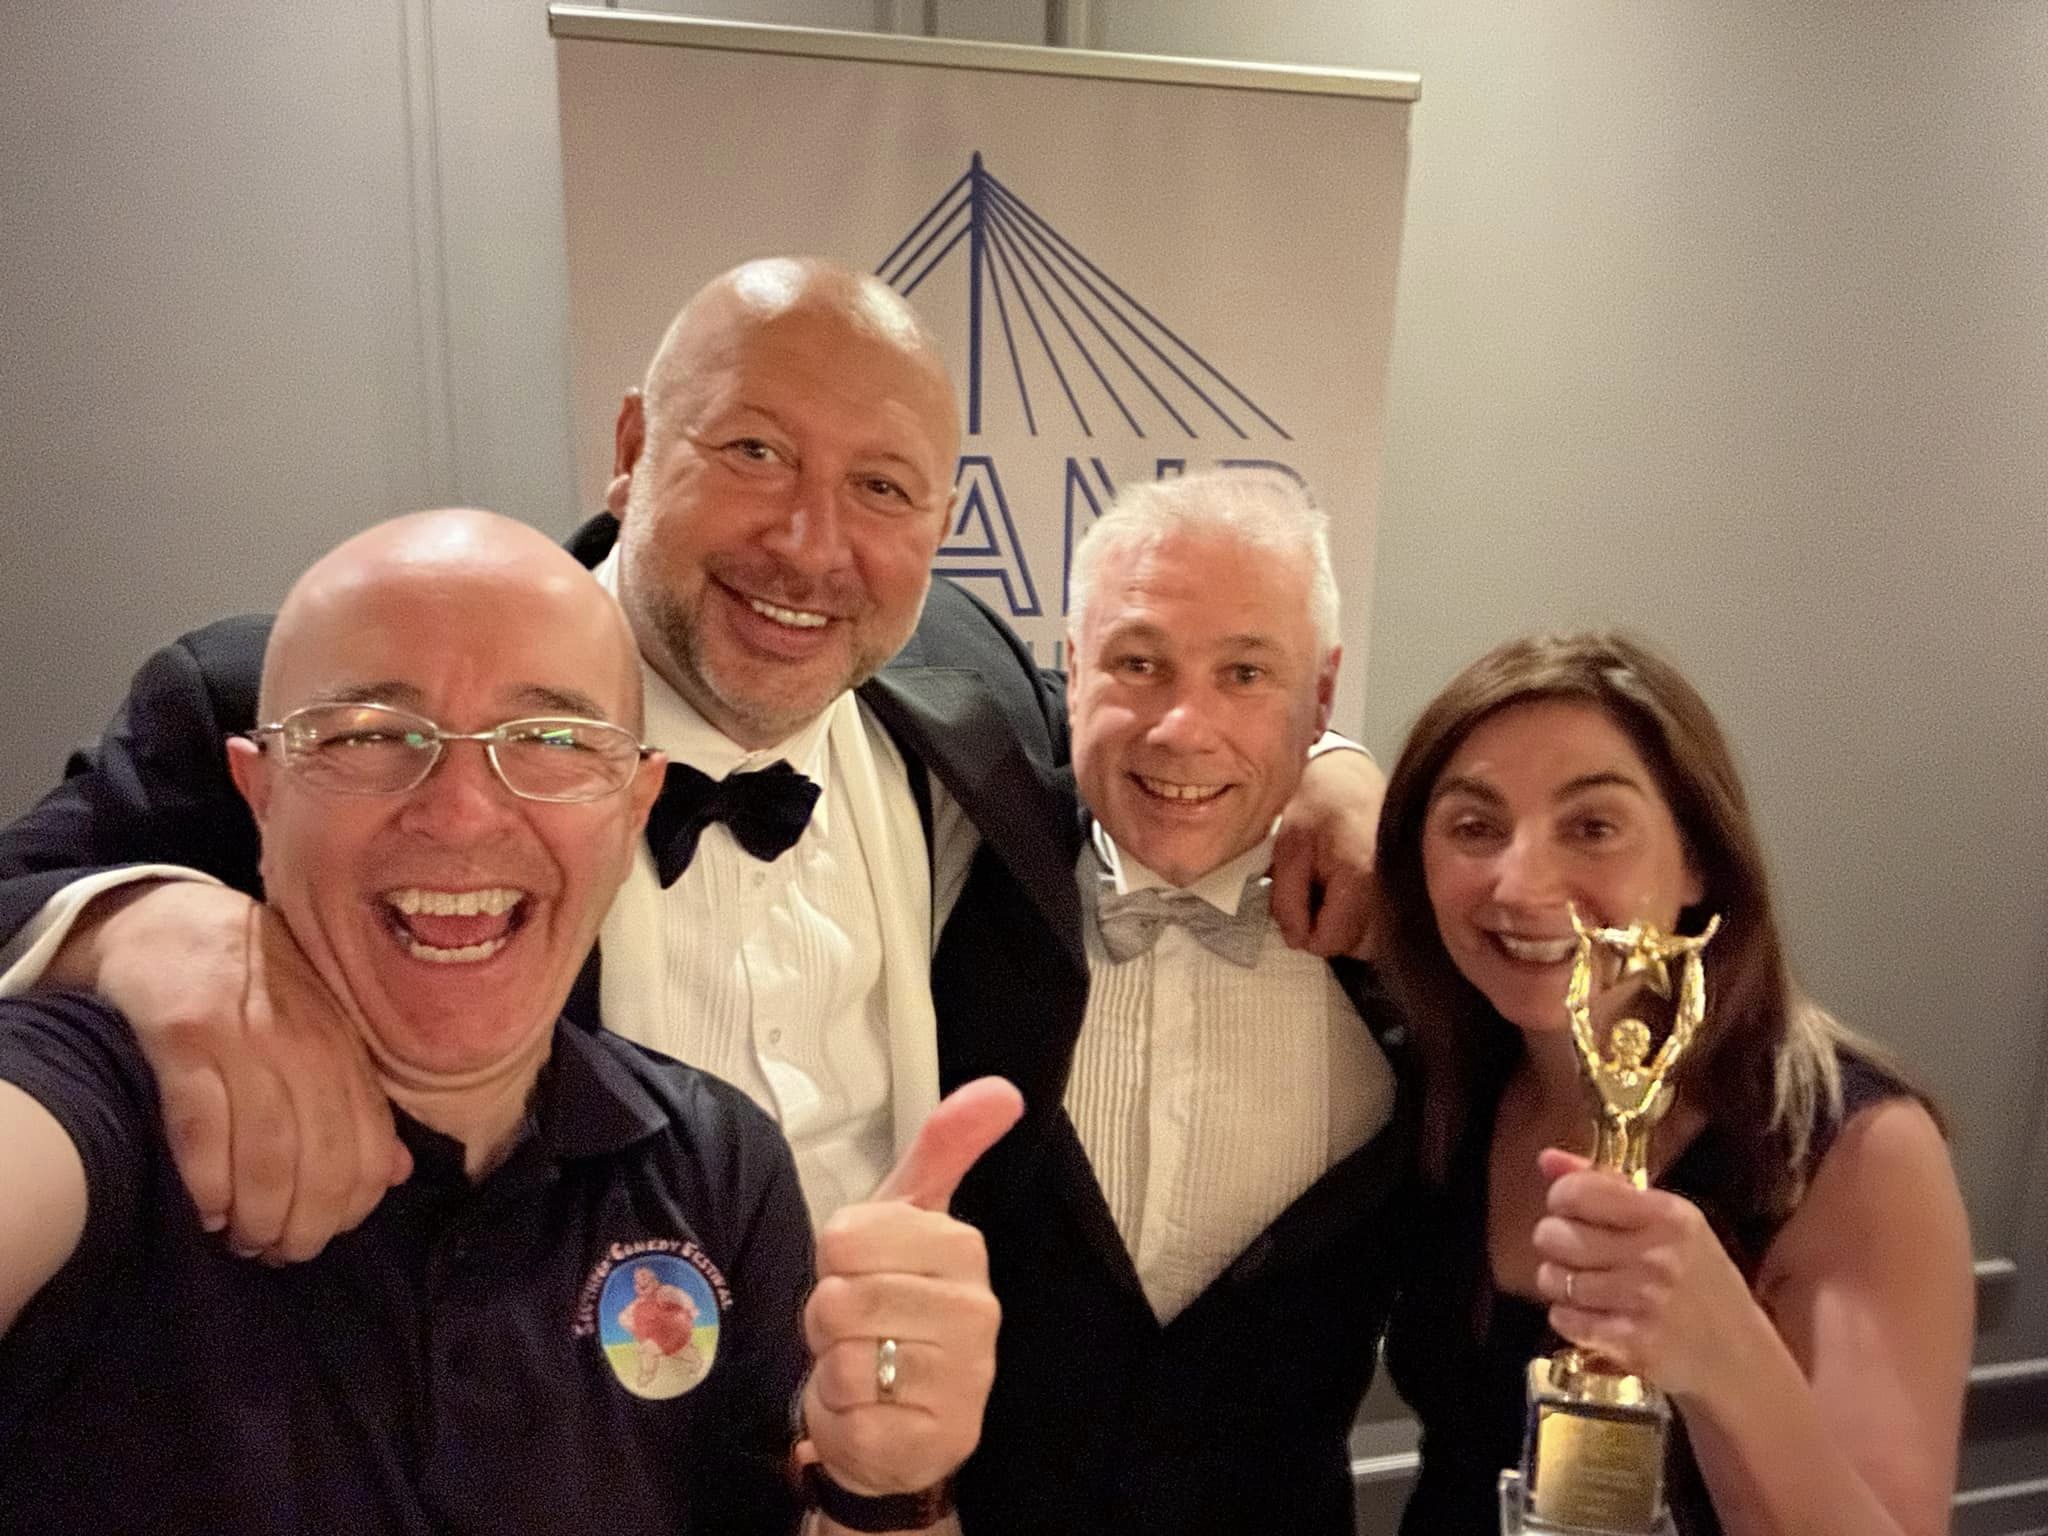 Brendan Riley (left) and Val Brady (right) of Big Comedy and Southport Comedy Festival win the Sefton Business In The Community Awardat the 2023 Pride Of Sefton Awards. They are pictured with event organisers Andrew Milhail (second left) and Andrew Brown (third left)